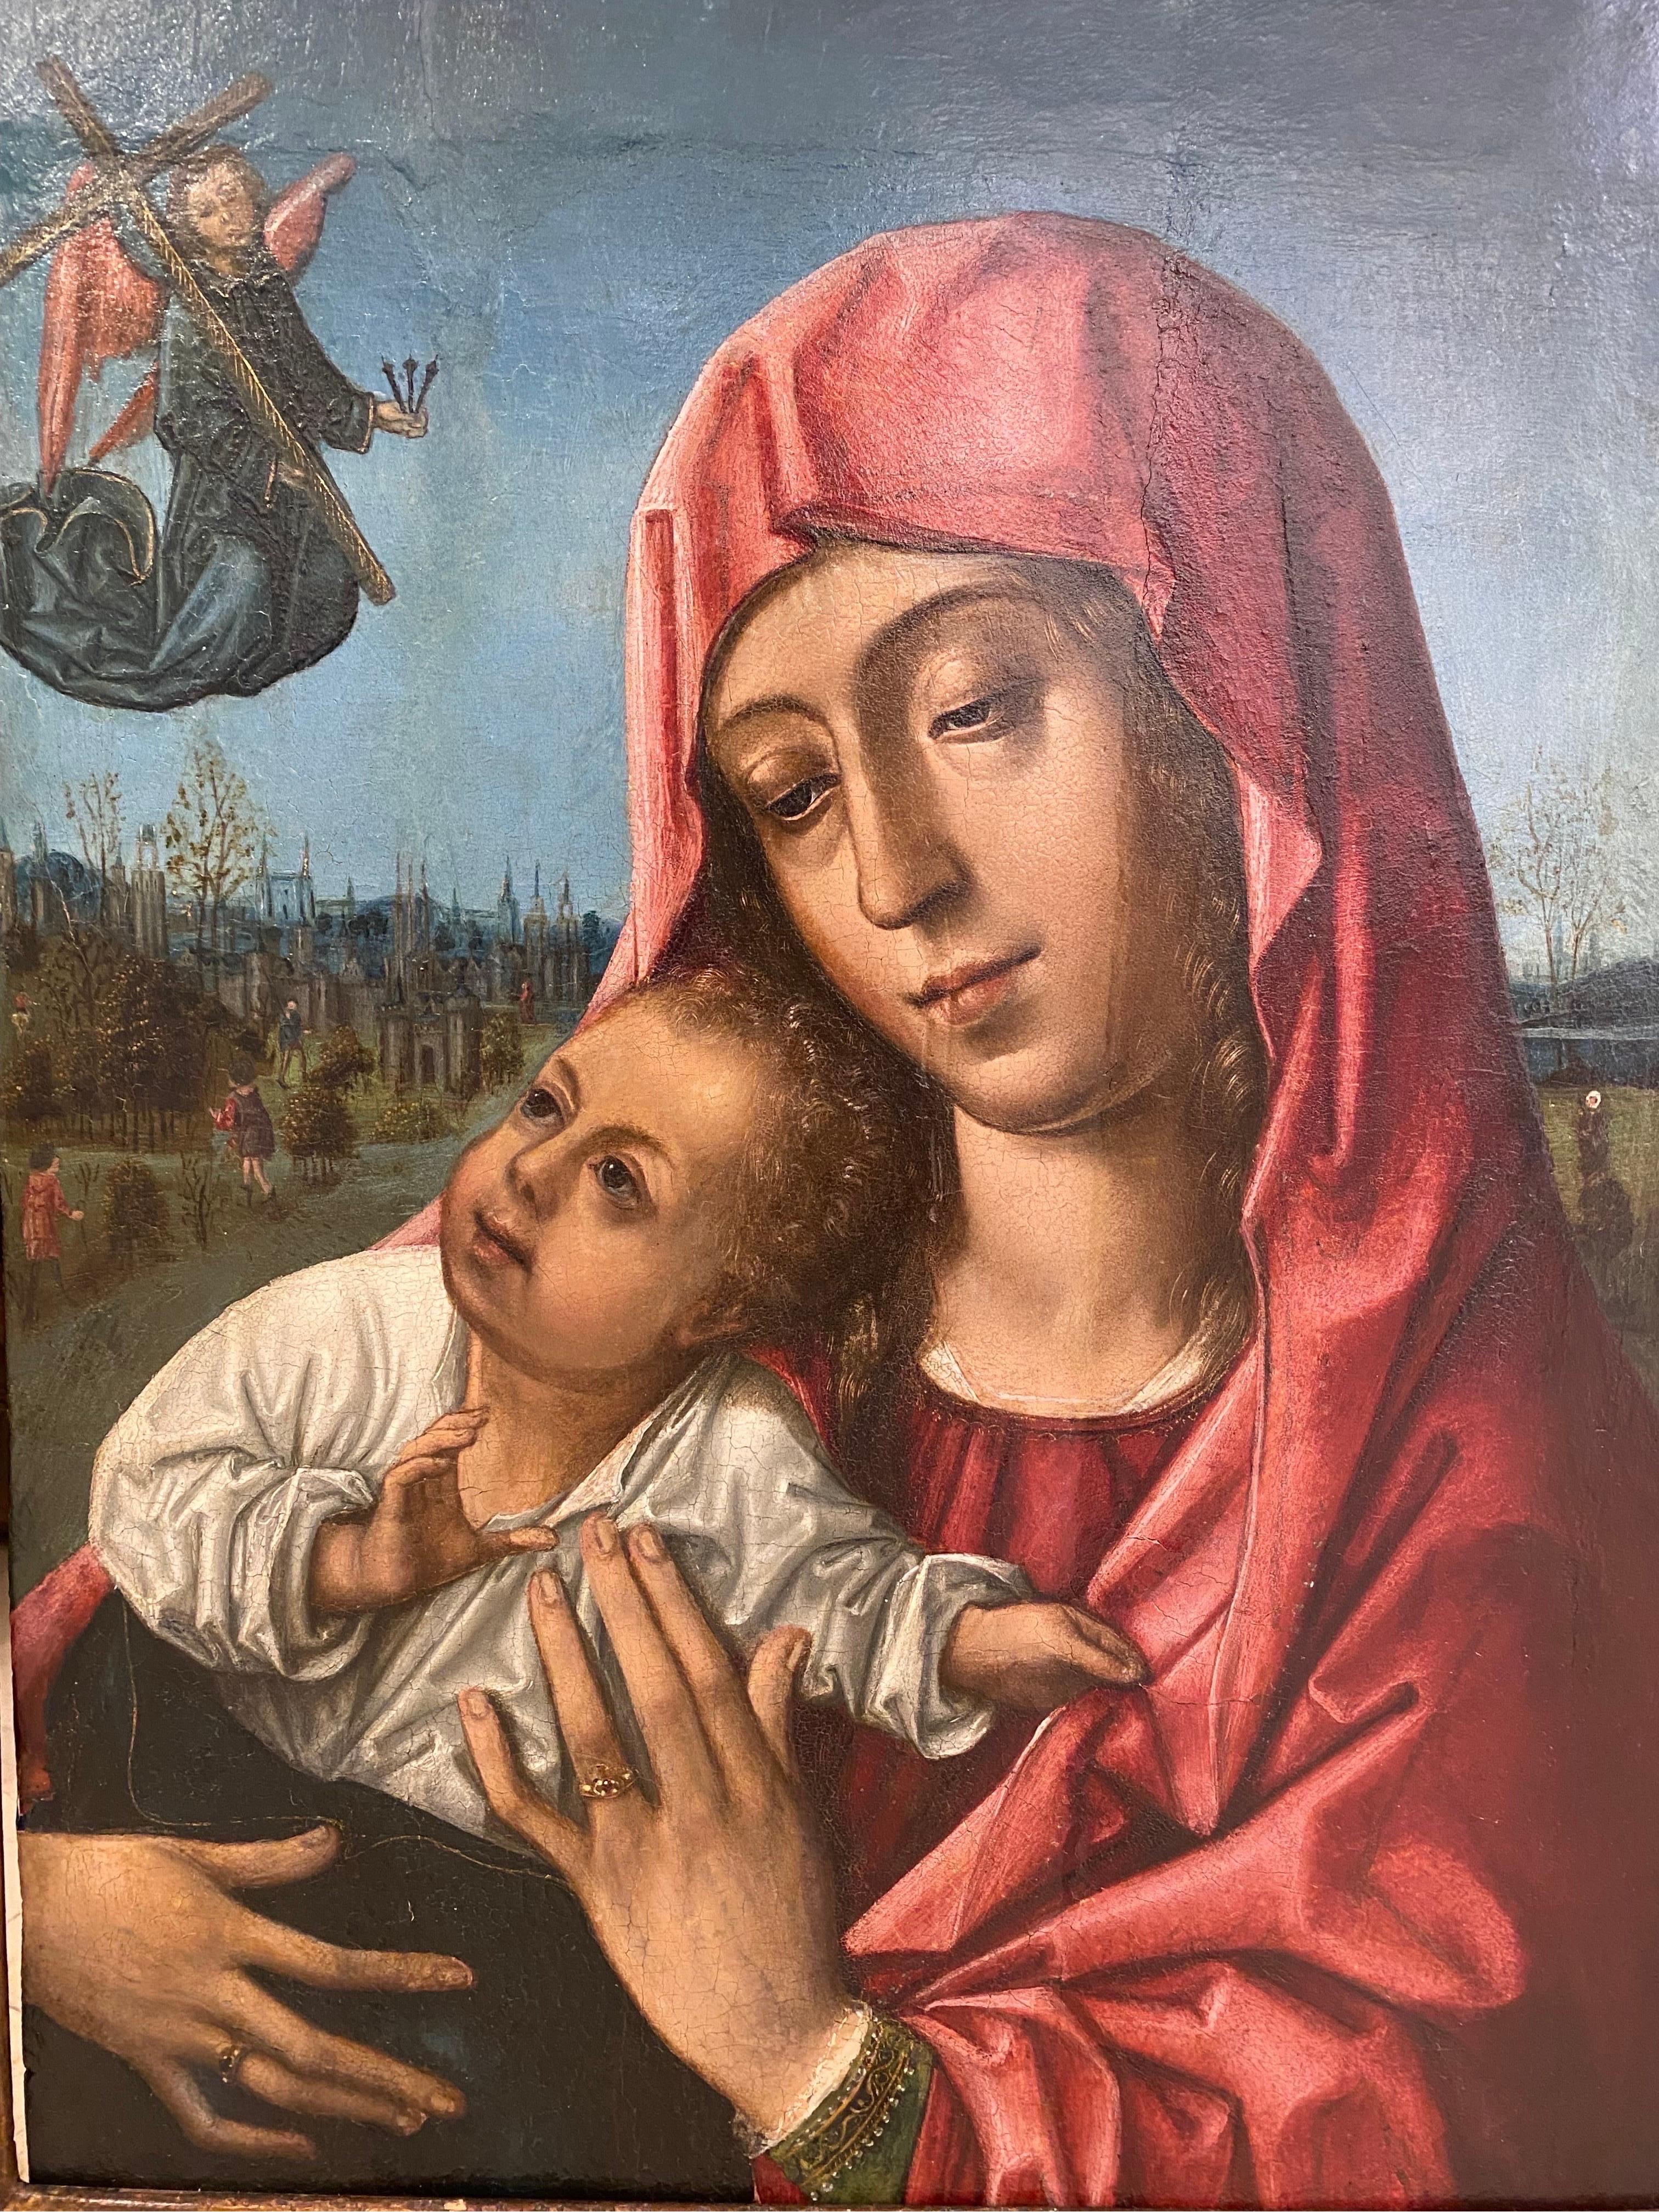 Virgen and child - Painting by Máster of The Luna’s